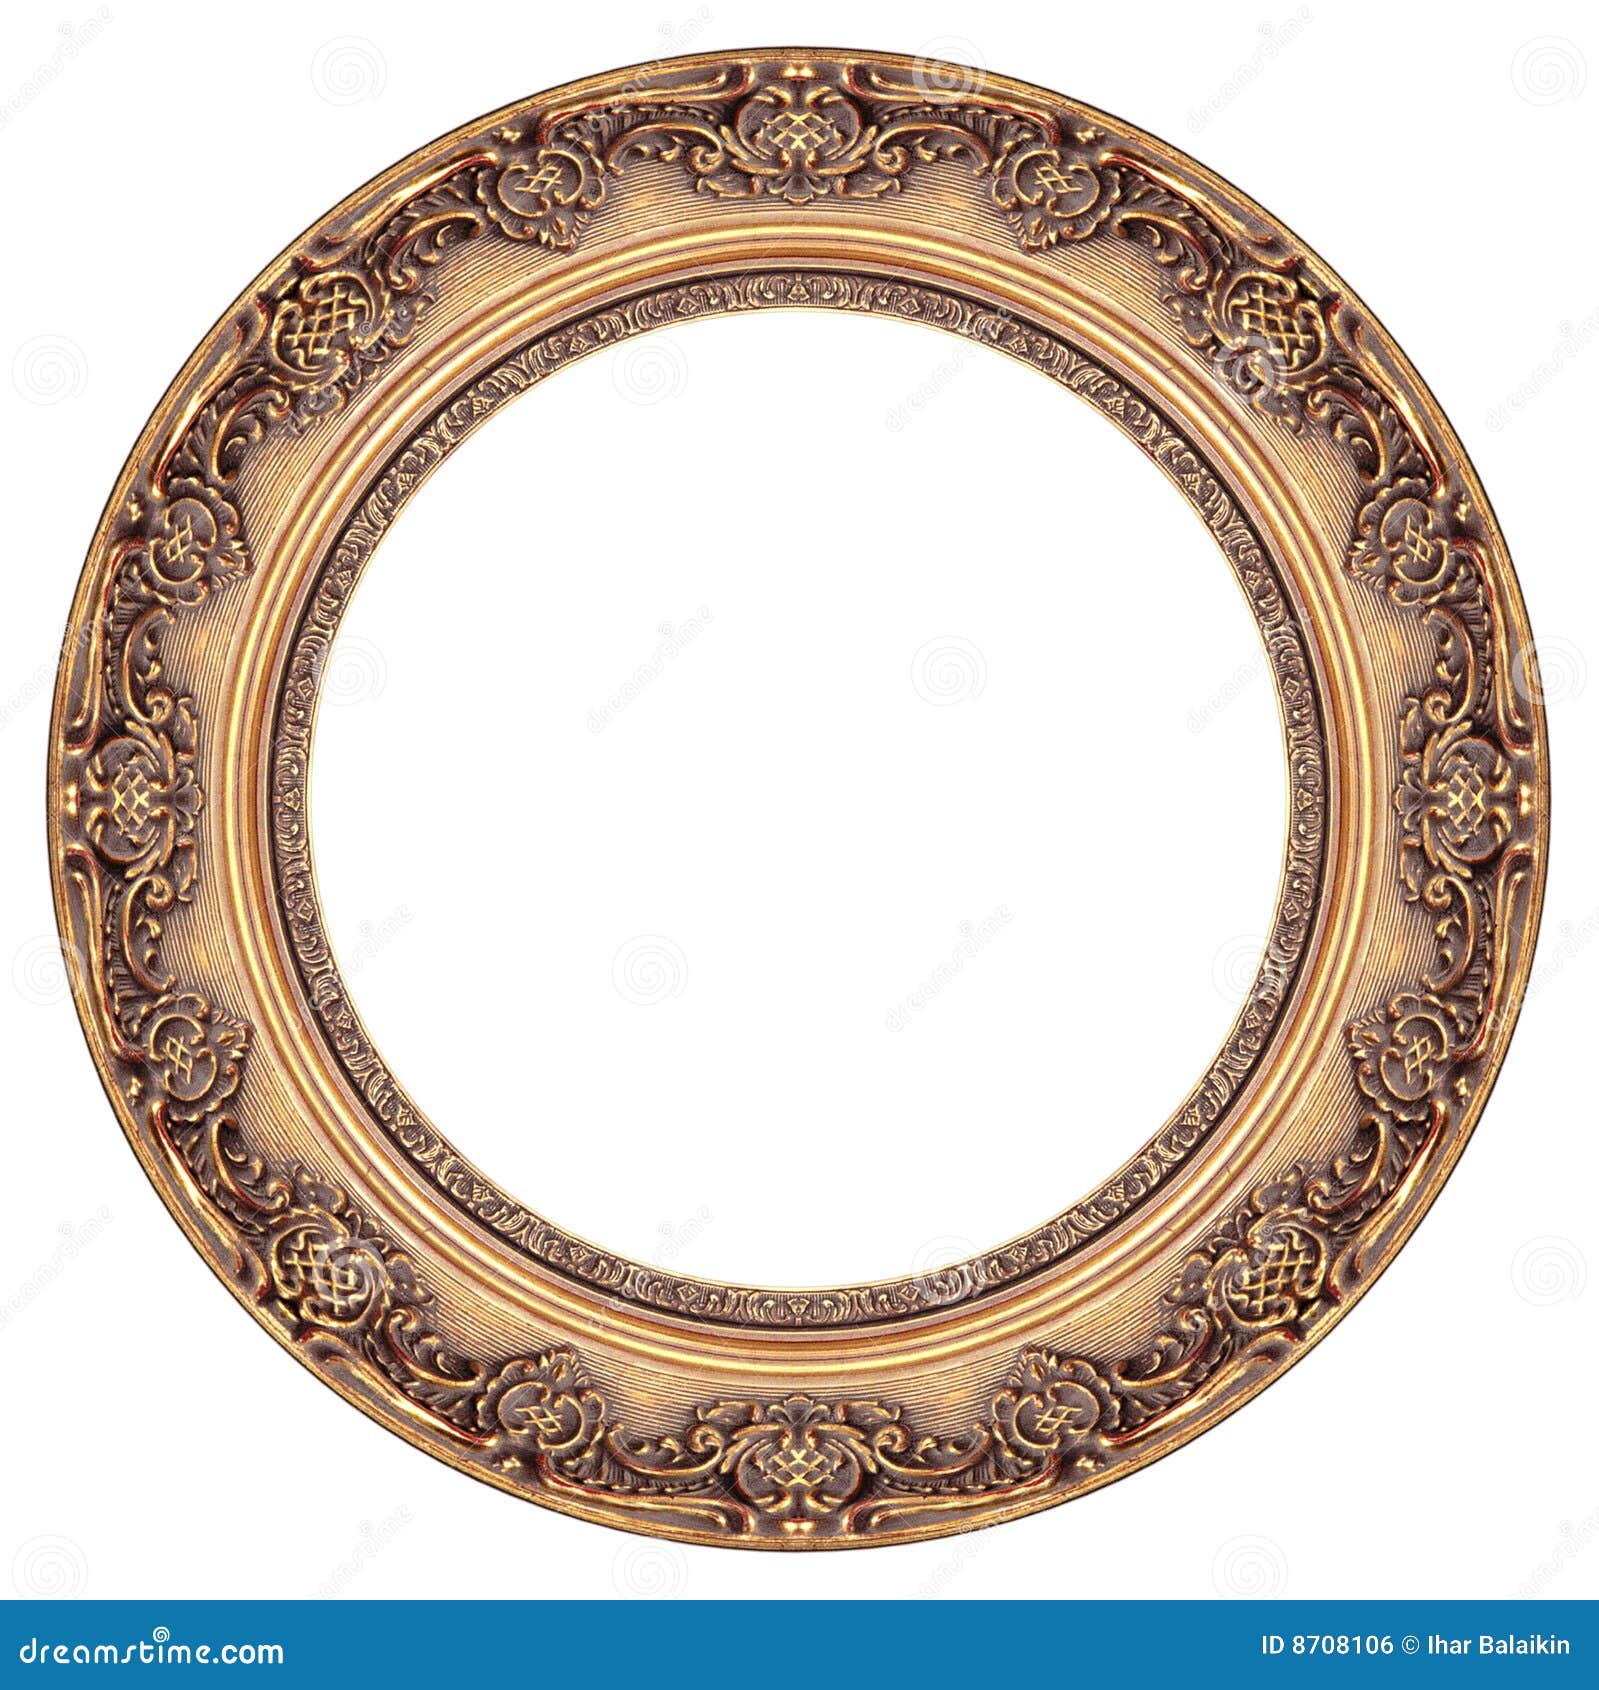 Oval Gold Picture Frame Royalty Free Stock Image - Image: 8708106